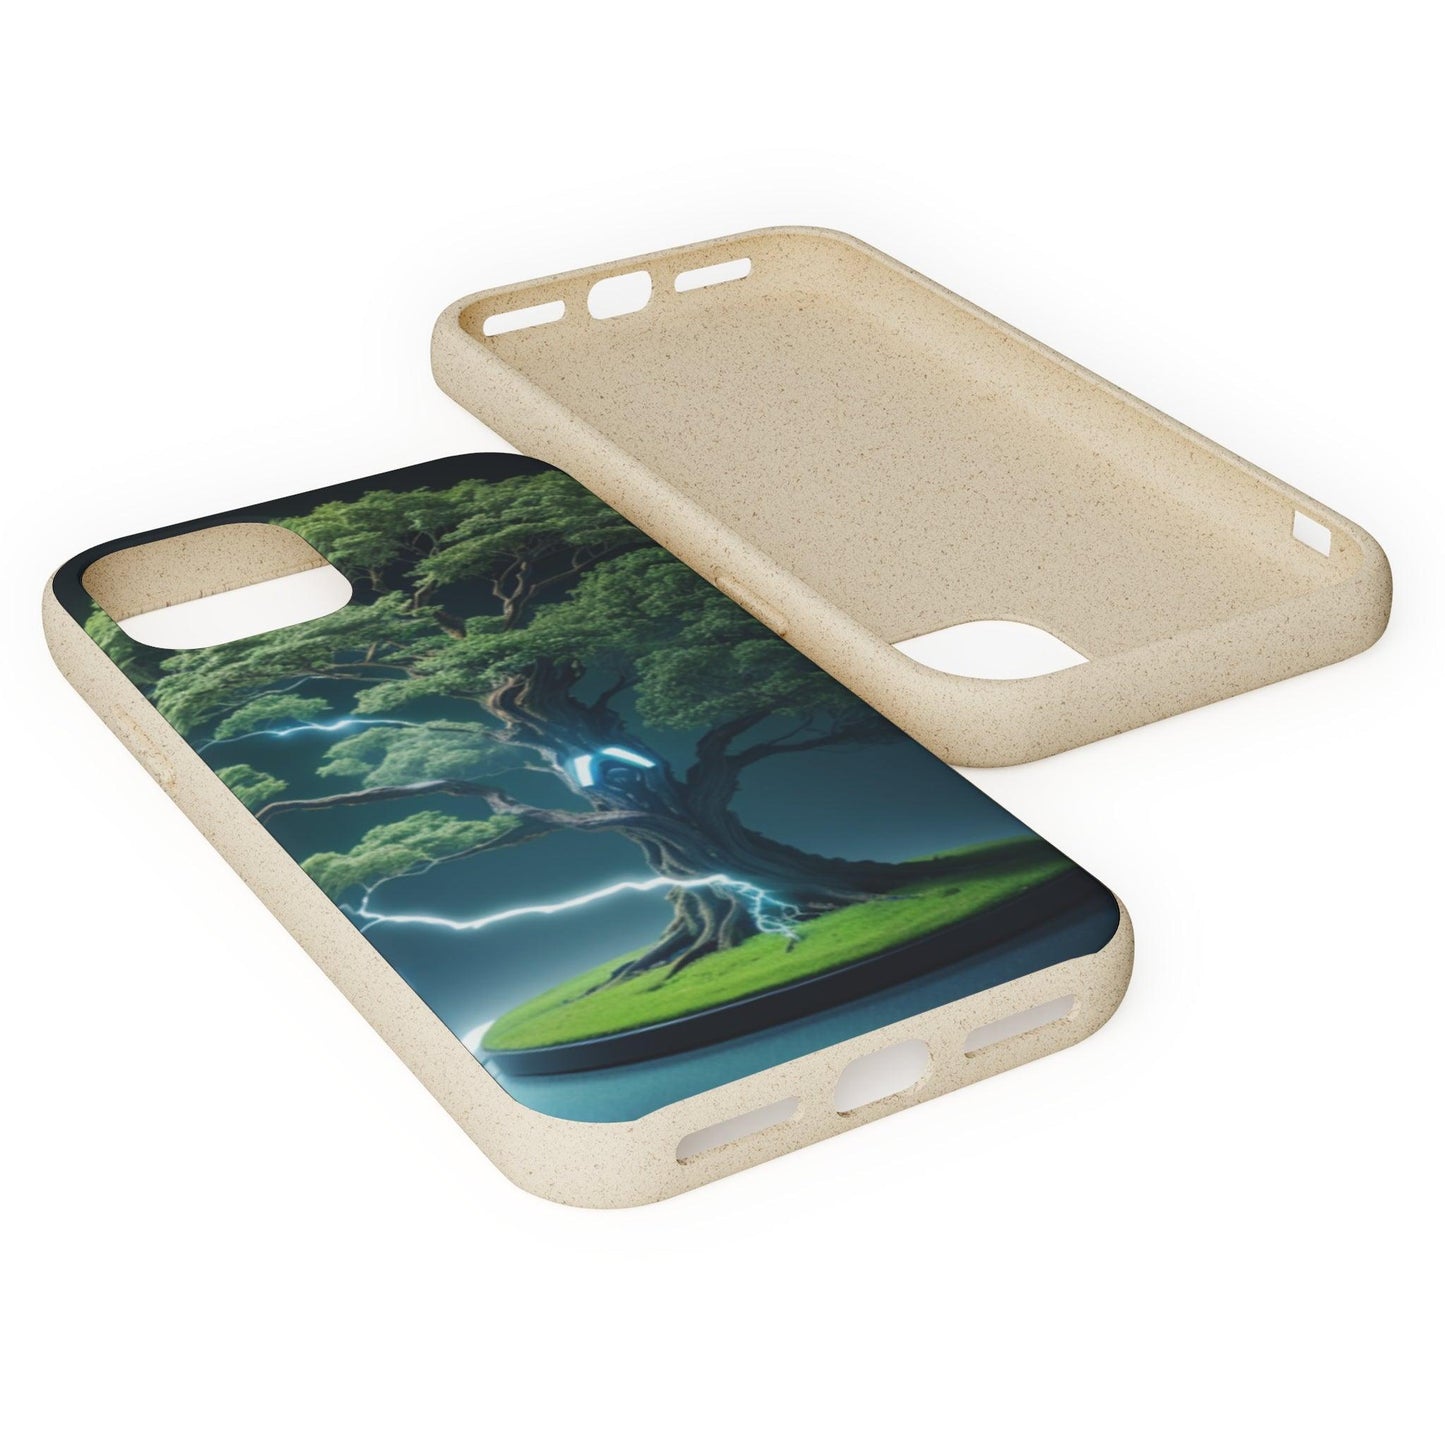 Biodegradable Cases - Eco-Friendly